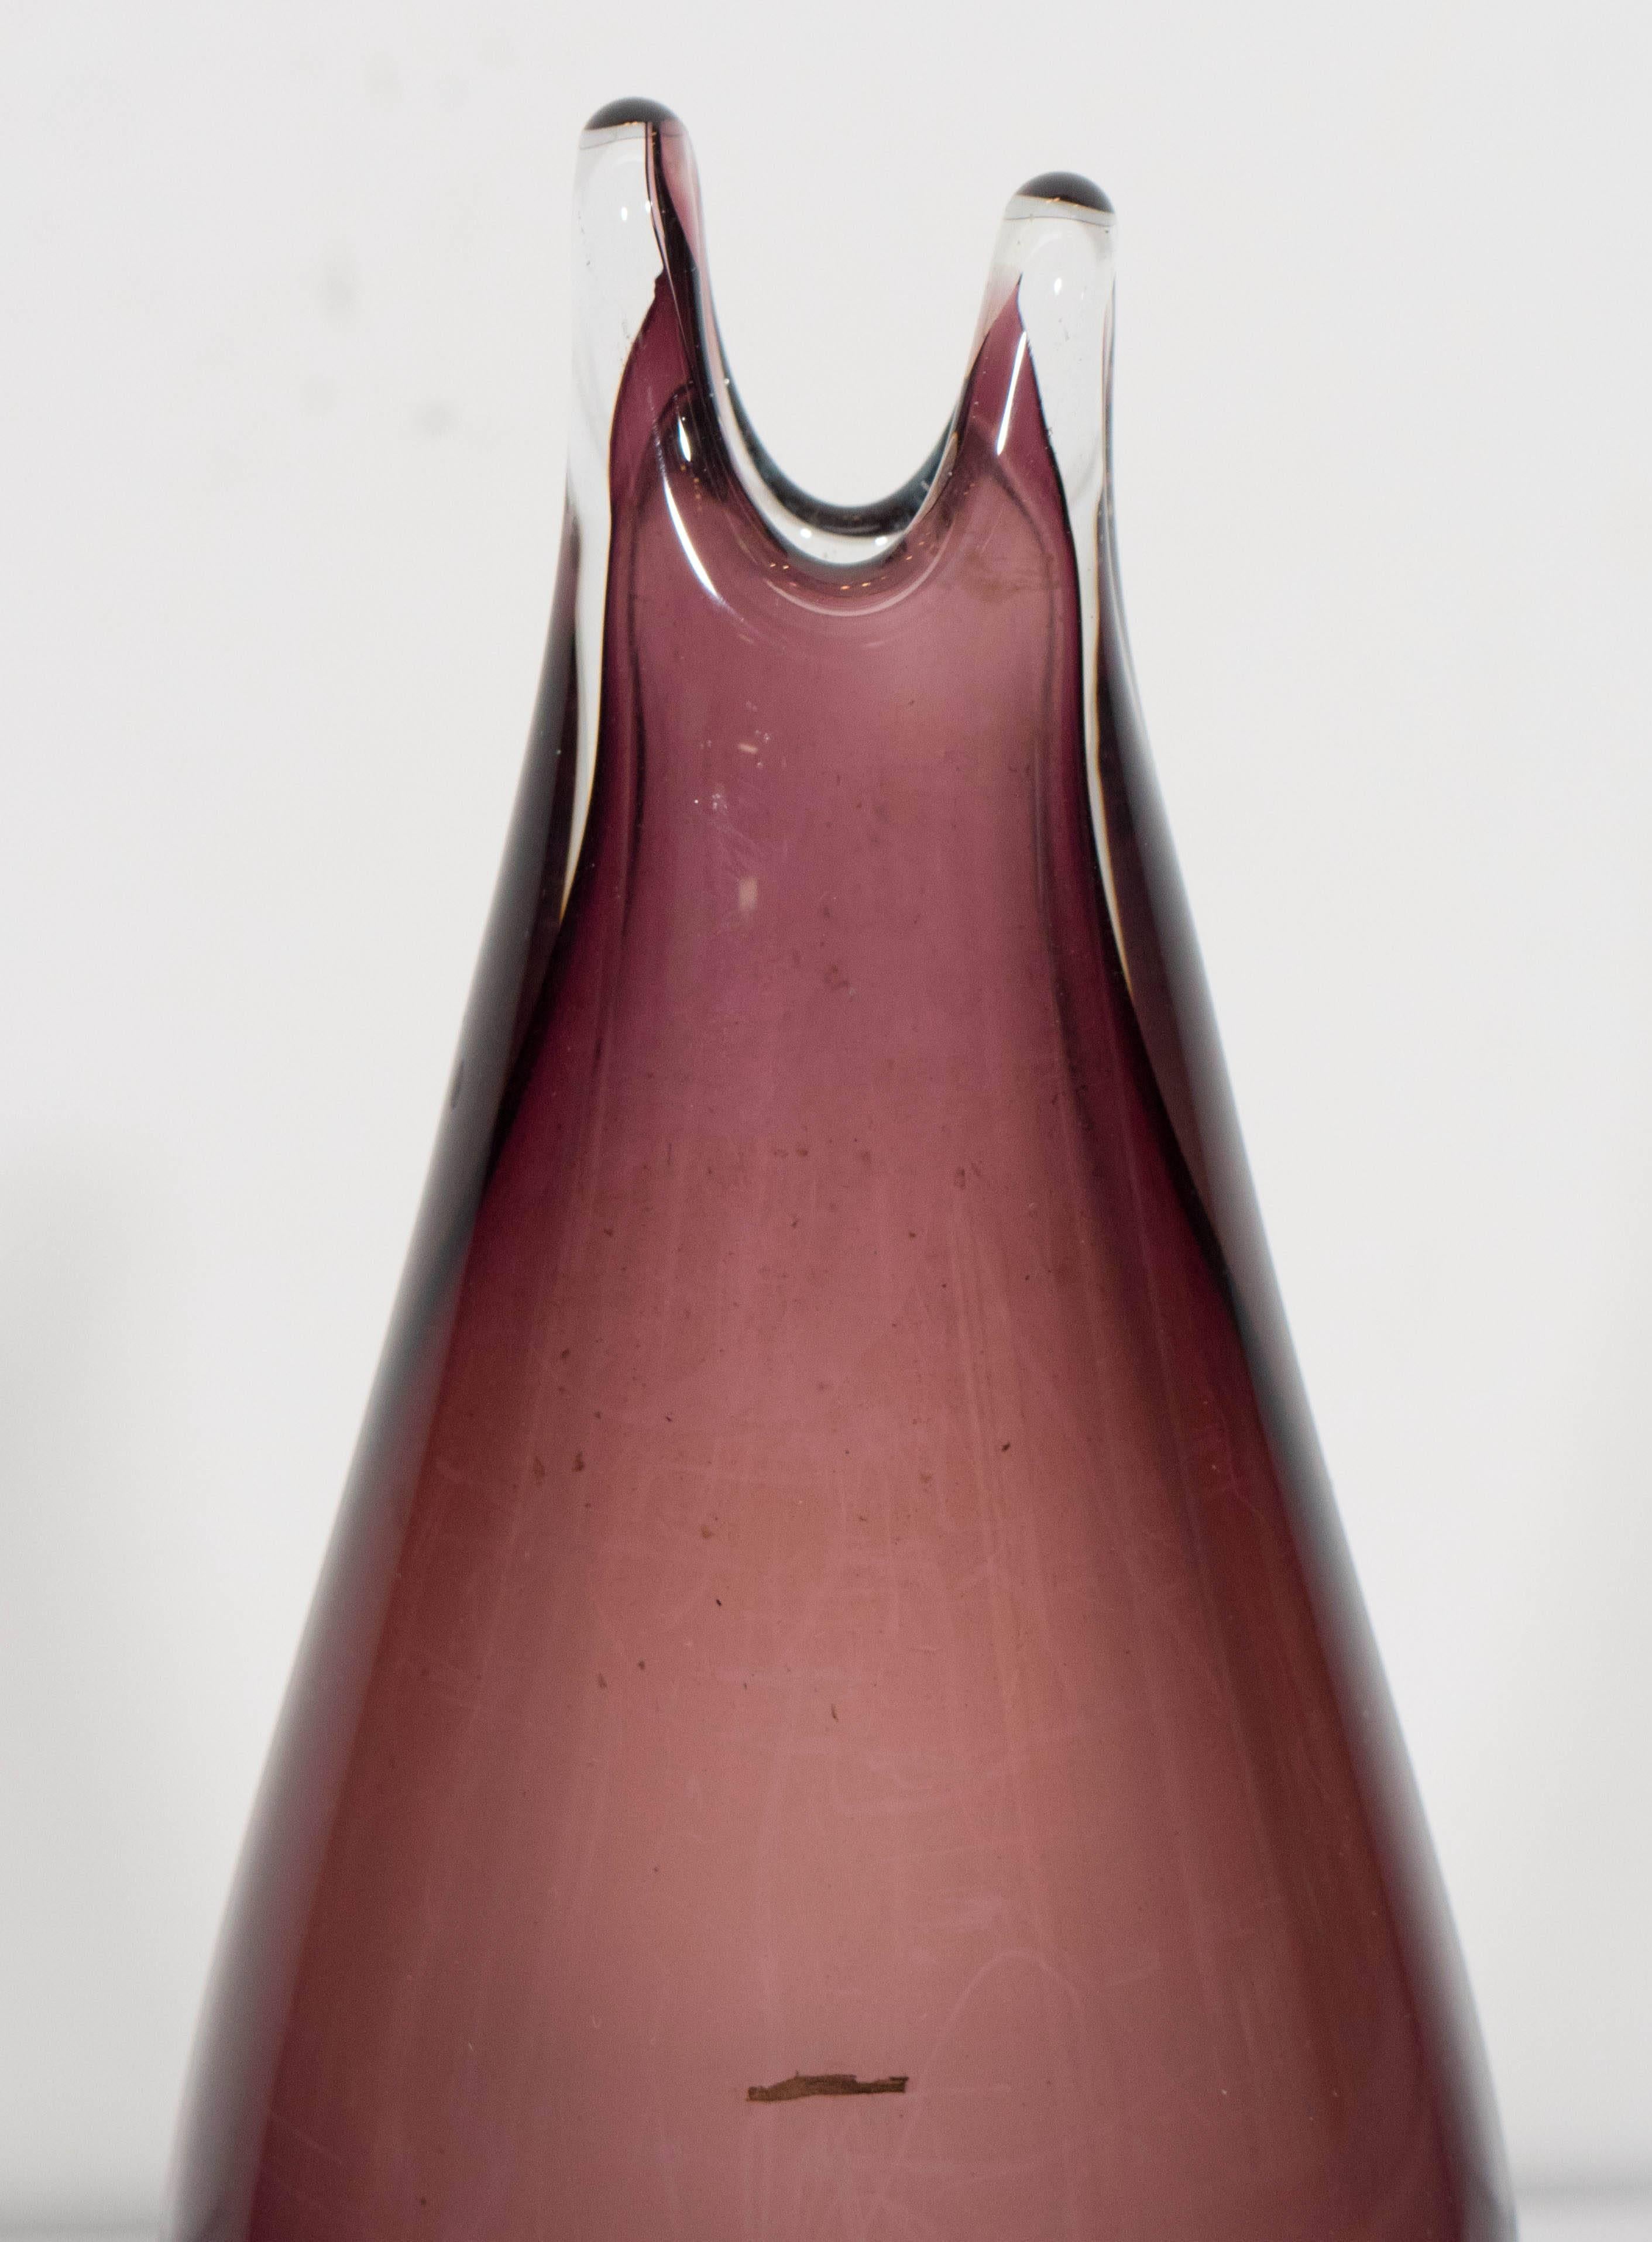 A vintage Murano glass teardrop form vase, with elongated lip, the interior in amethyst, cased in clear layer. The vase remains in very good condition, consistent with age and use, including some minuscule scratches to the base.